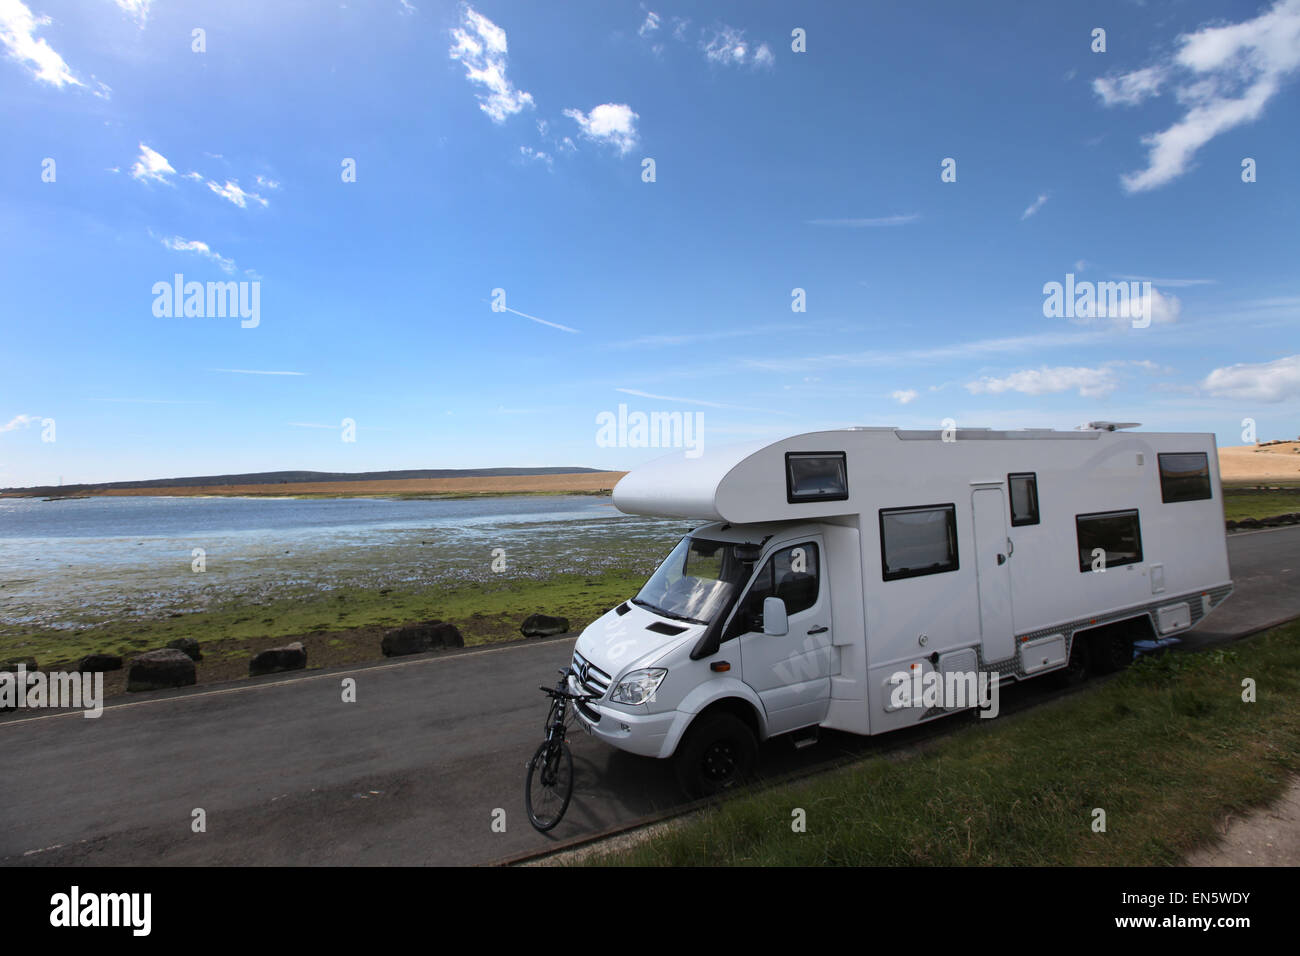 A camper van pictured in a beauty spot in Keyhaven, The New Forest, Hampshire, UK Stock Photo